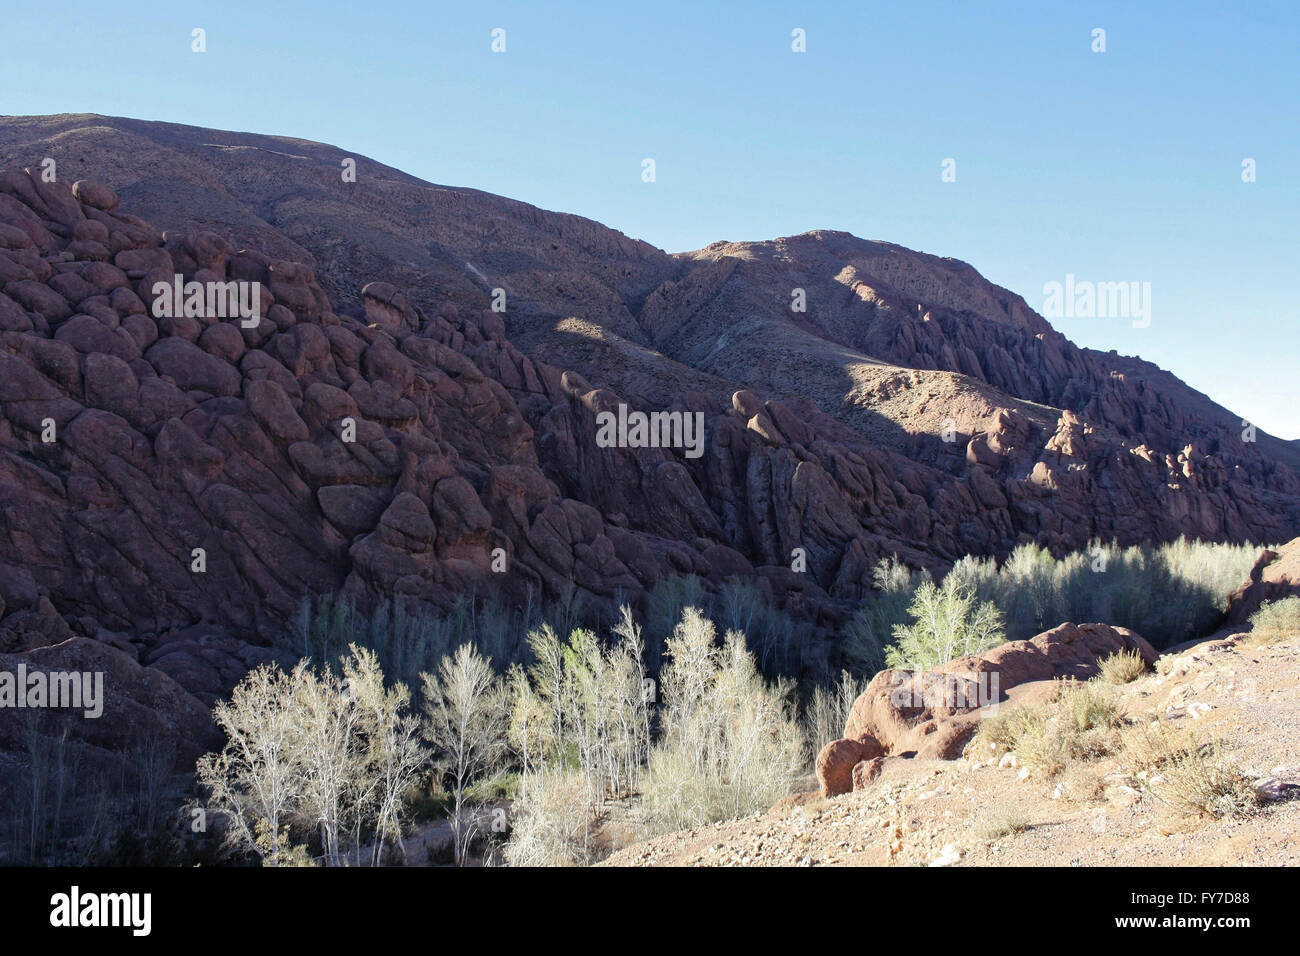 Houses and landscape in the morning in a valley near the Dadès River in Morocco. Stock Photo